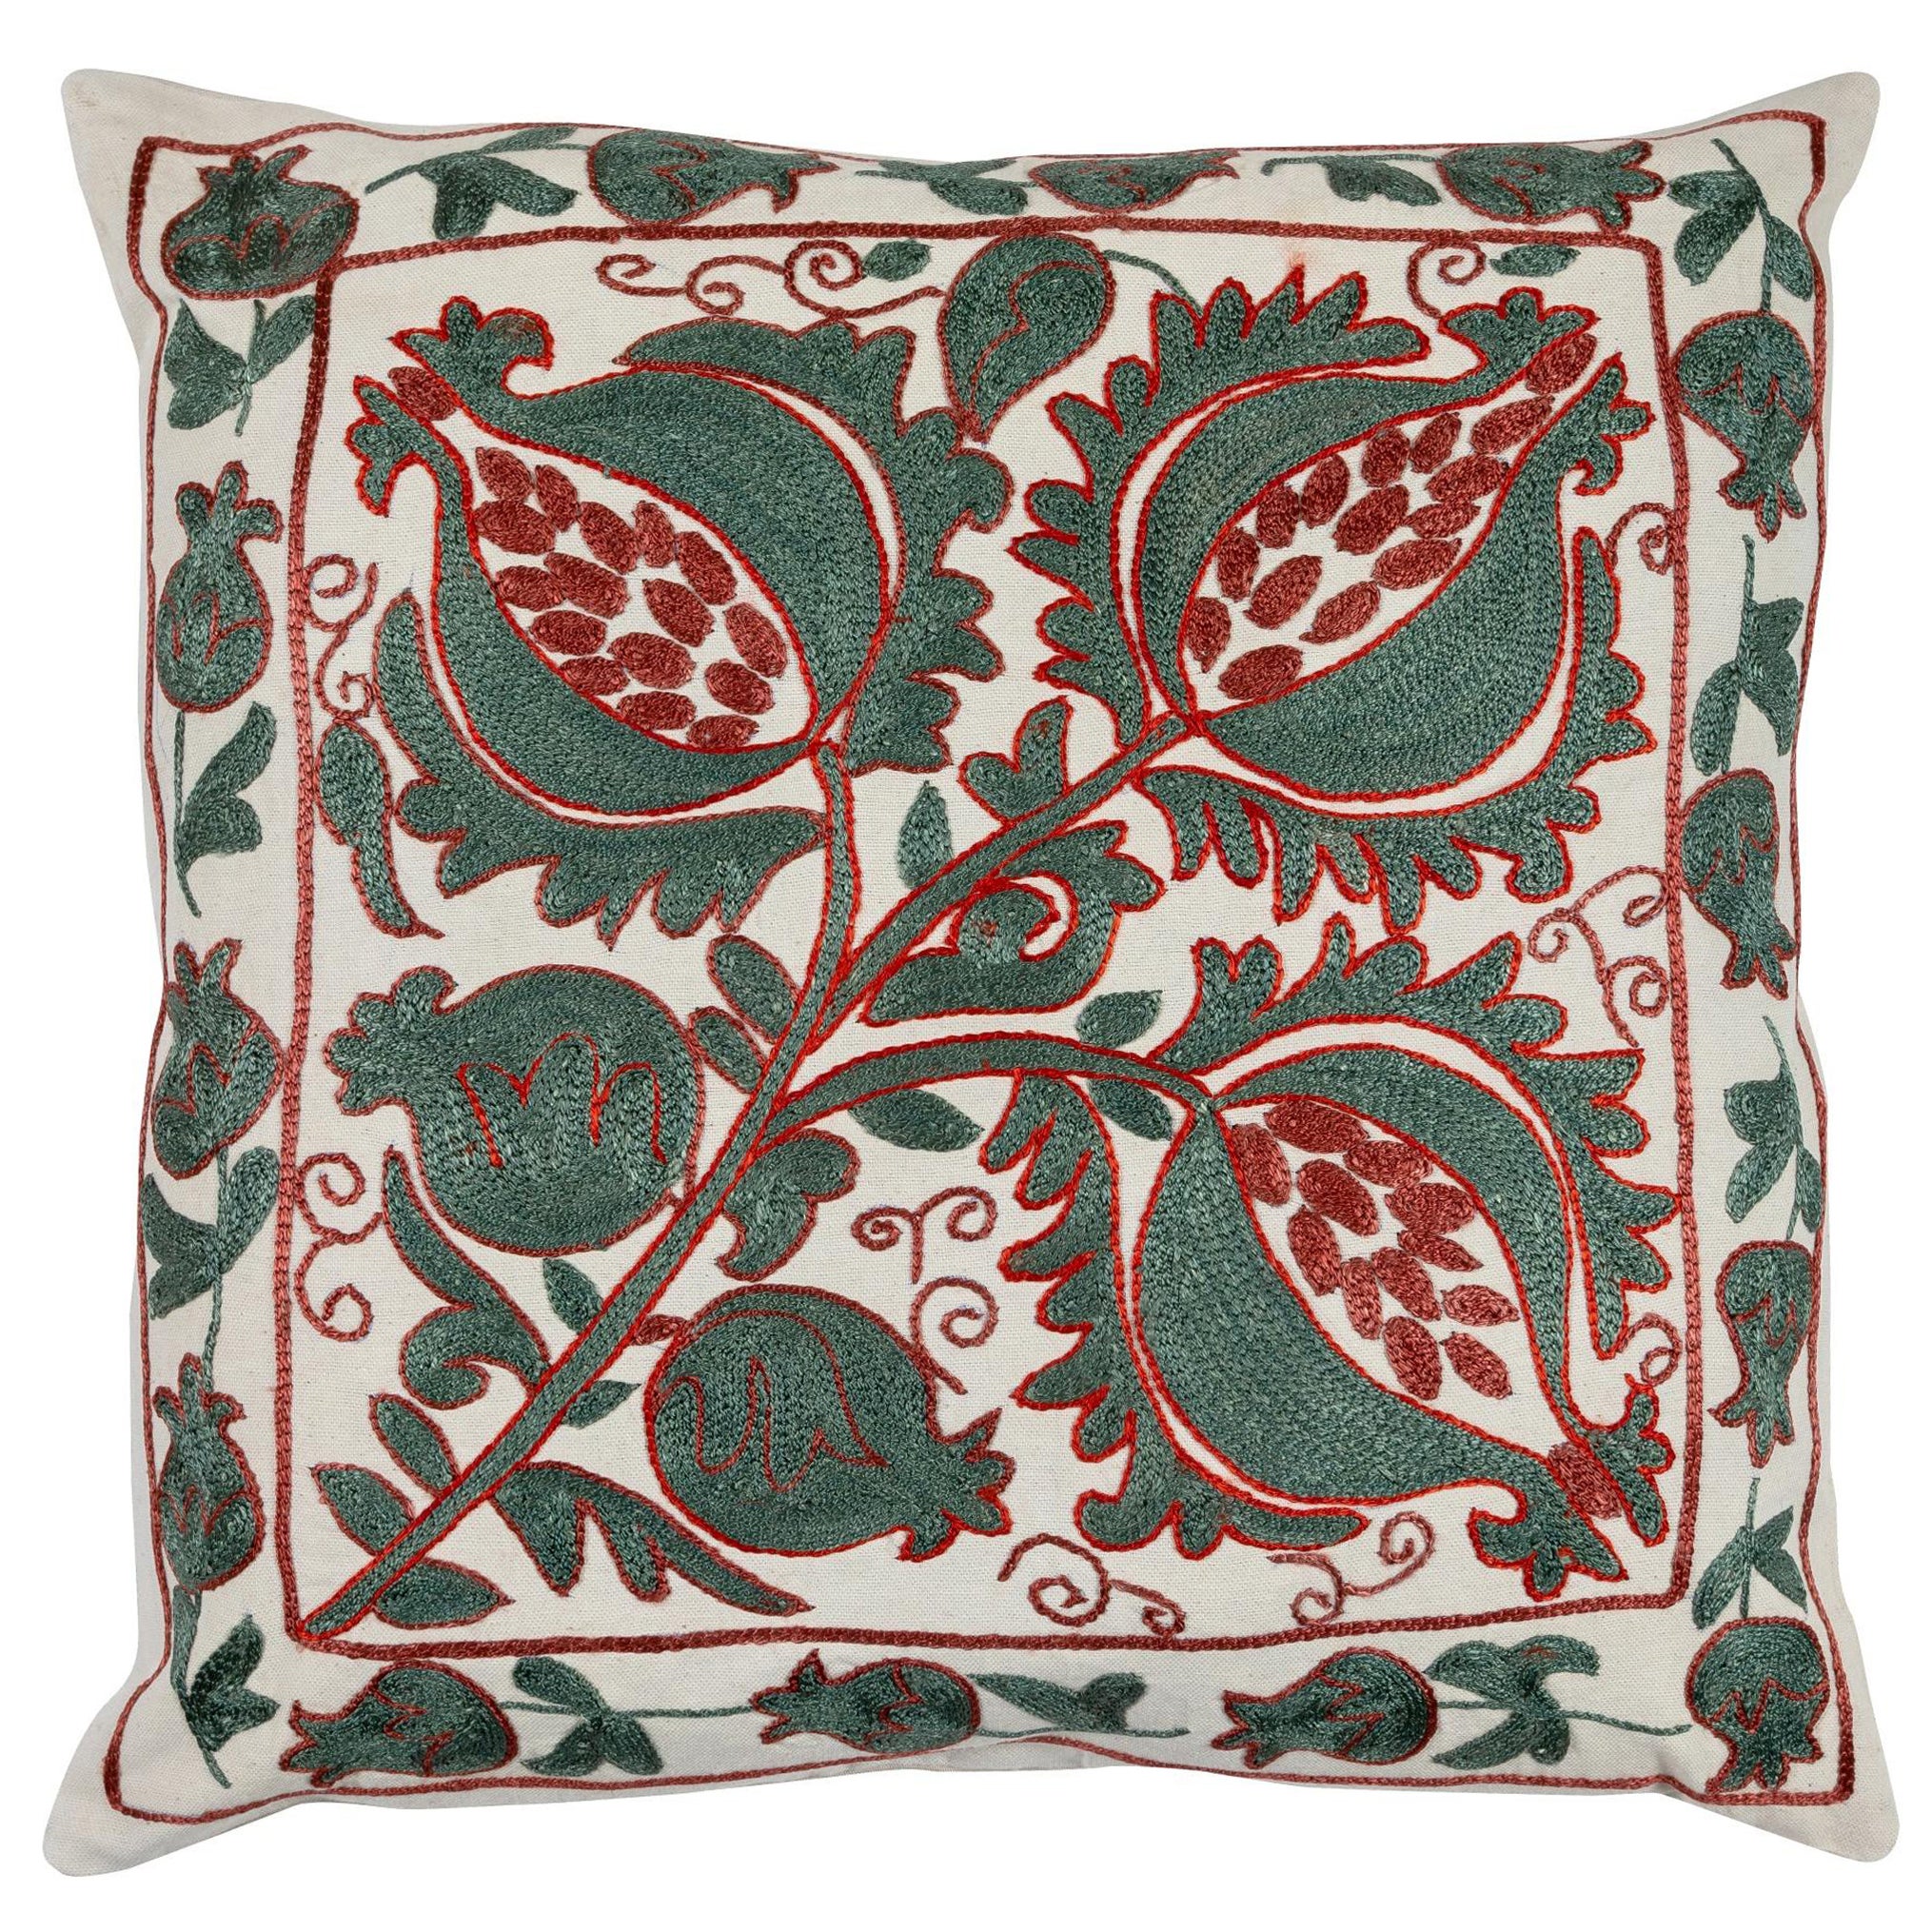 18"x18" Suzani Embroidered Cotton & Silk Cushion Cover in Green, Red and Cream